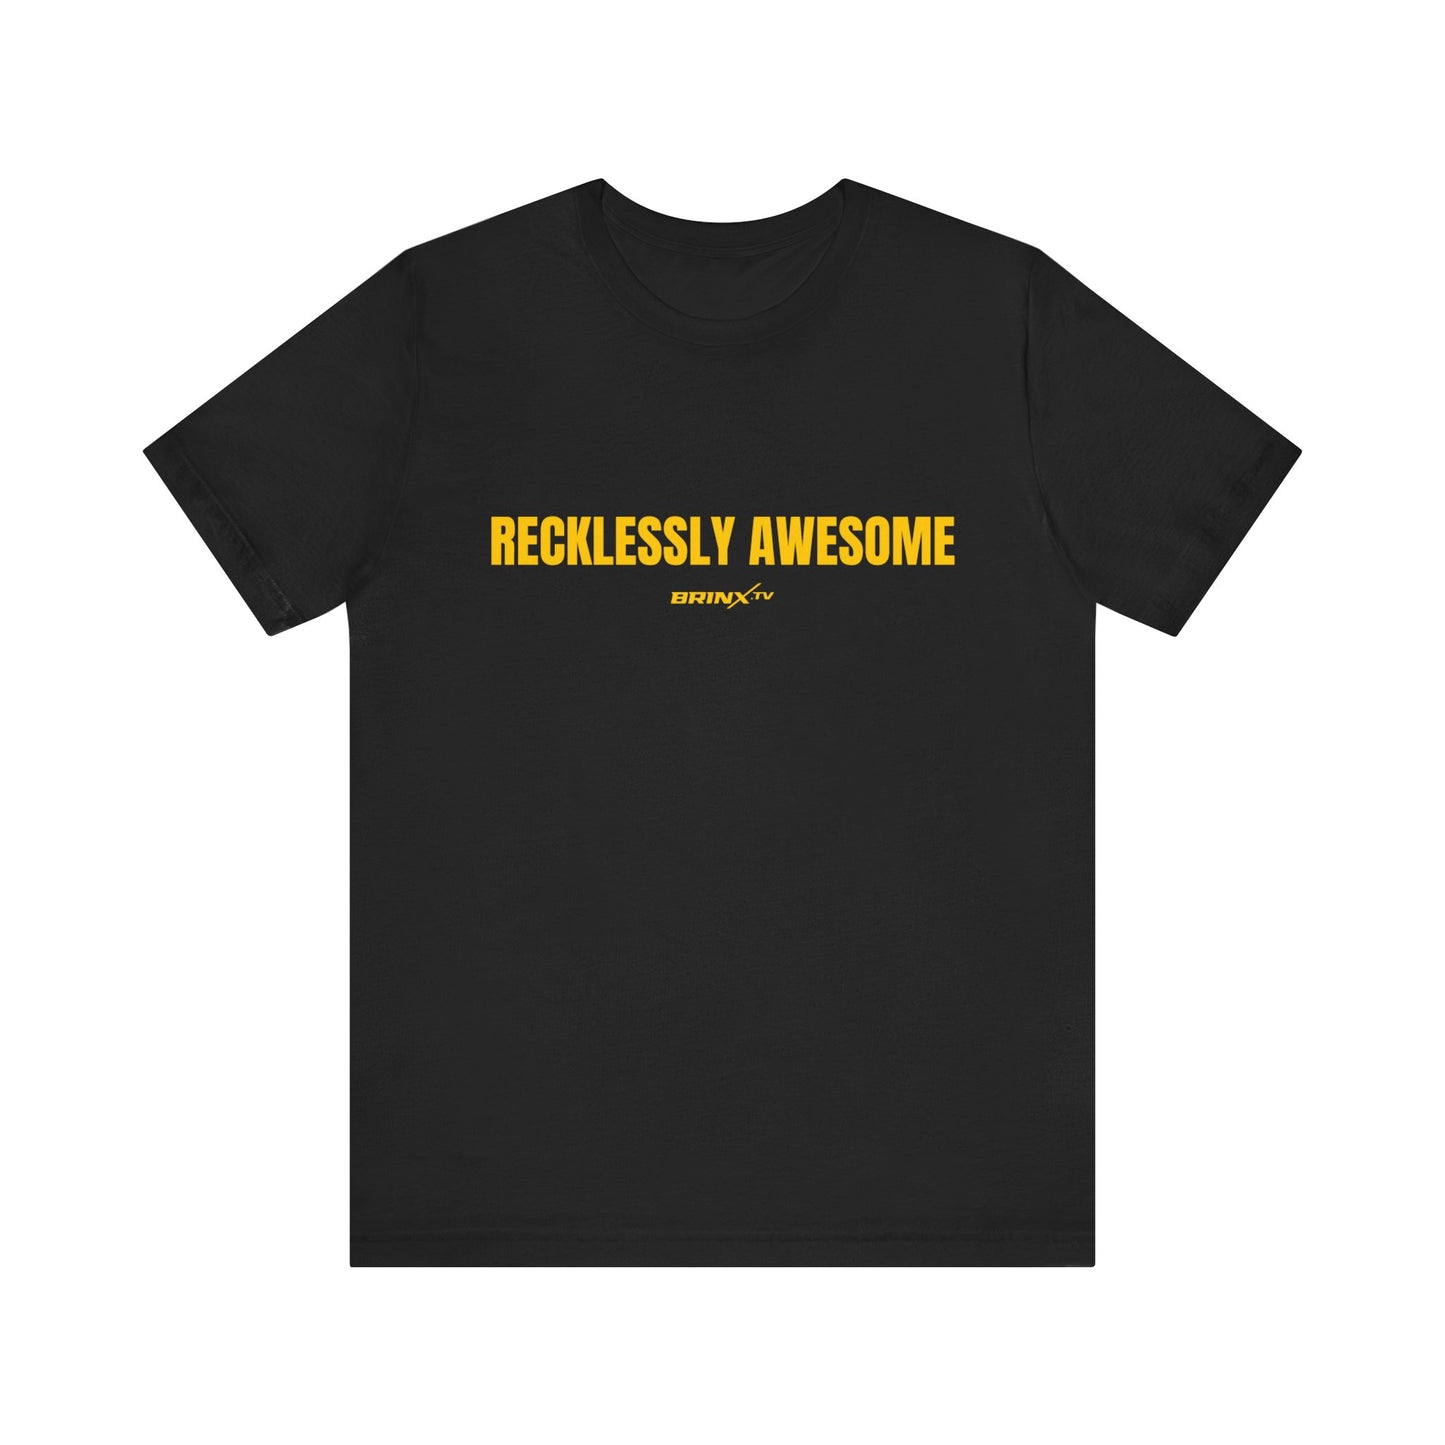 Recklessly Awesome Tee